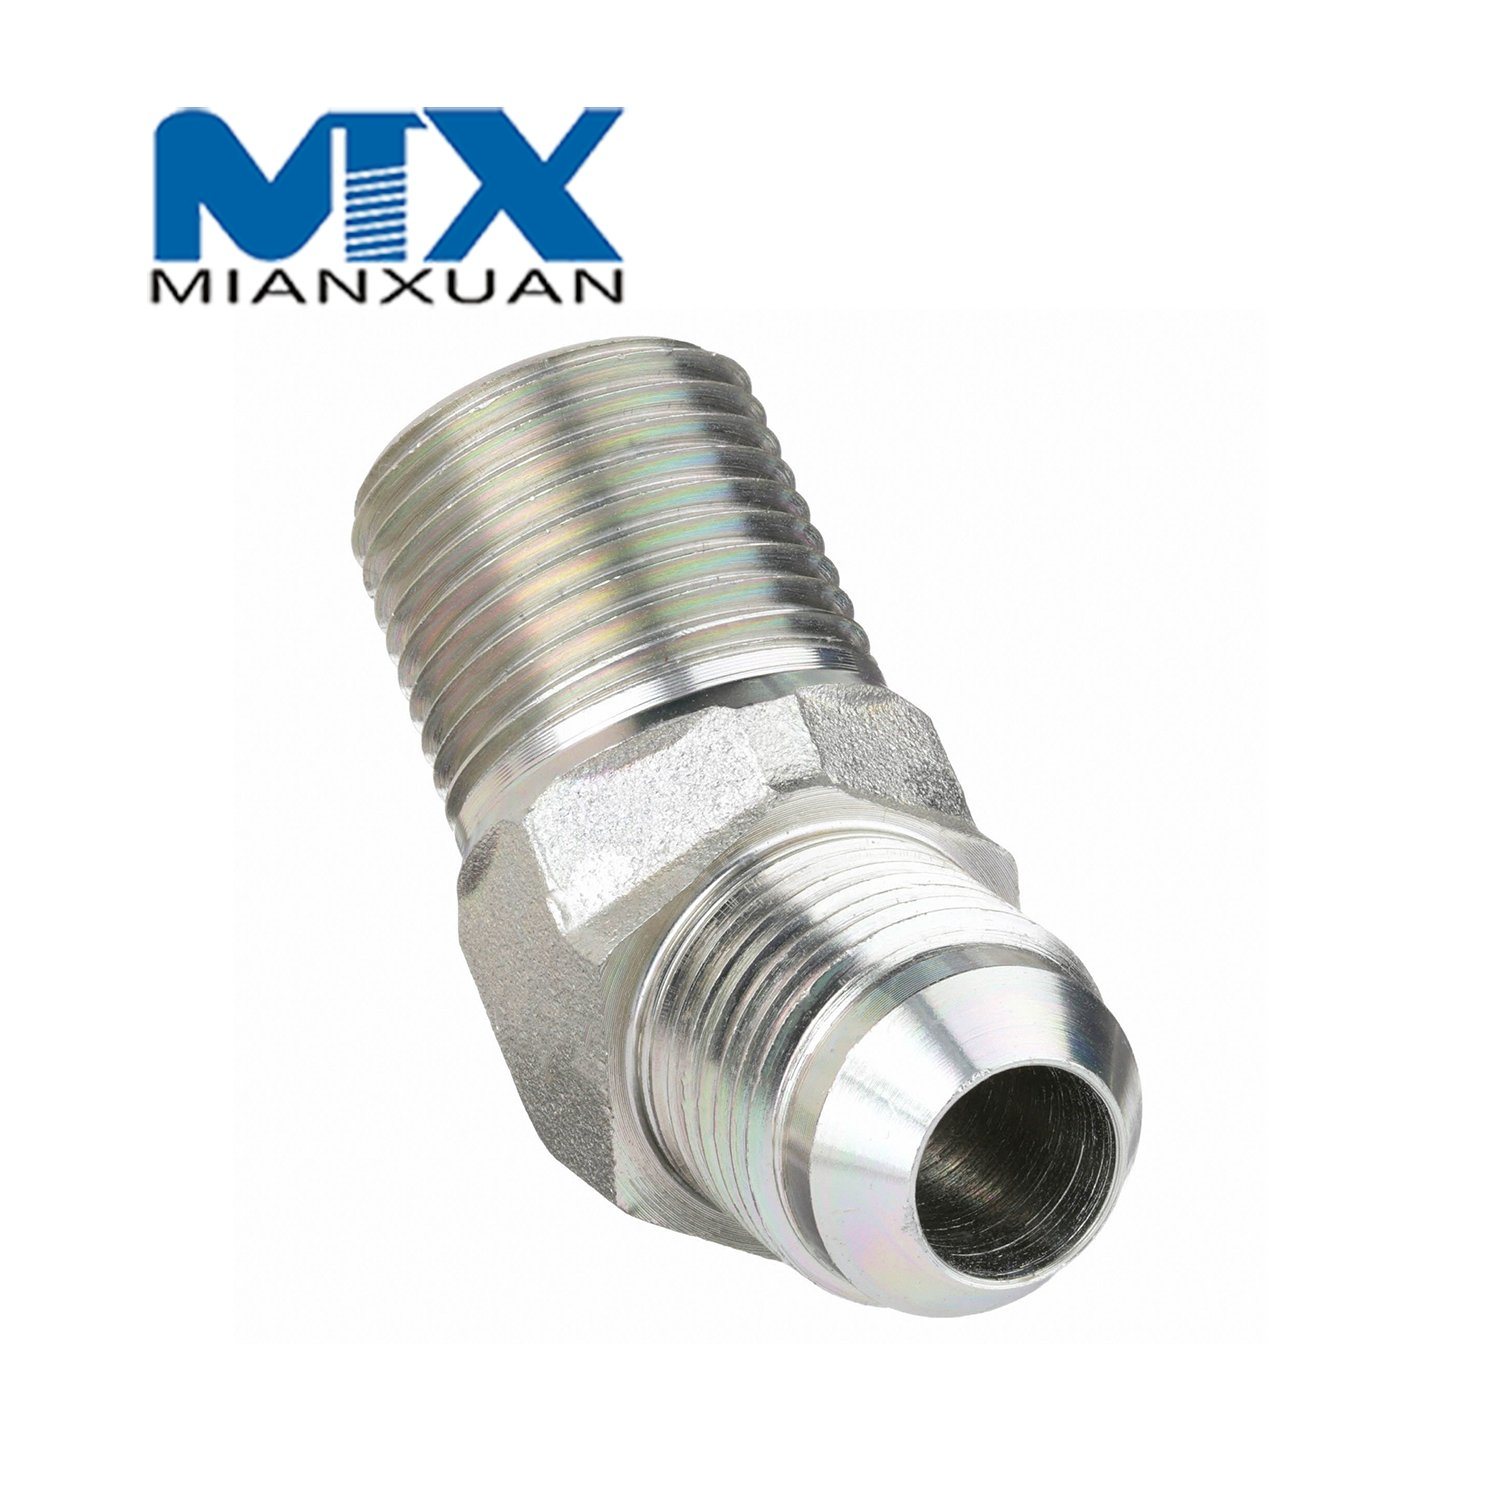 Stainless Steel Hydraulic Metric 90degree Cone Seat Pipe Connector Coupling Adapter Fittings